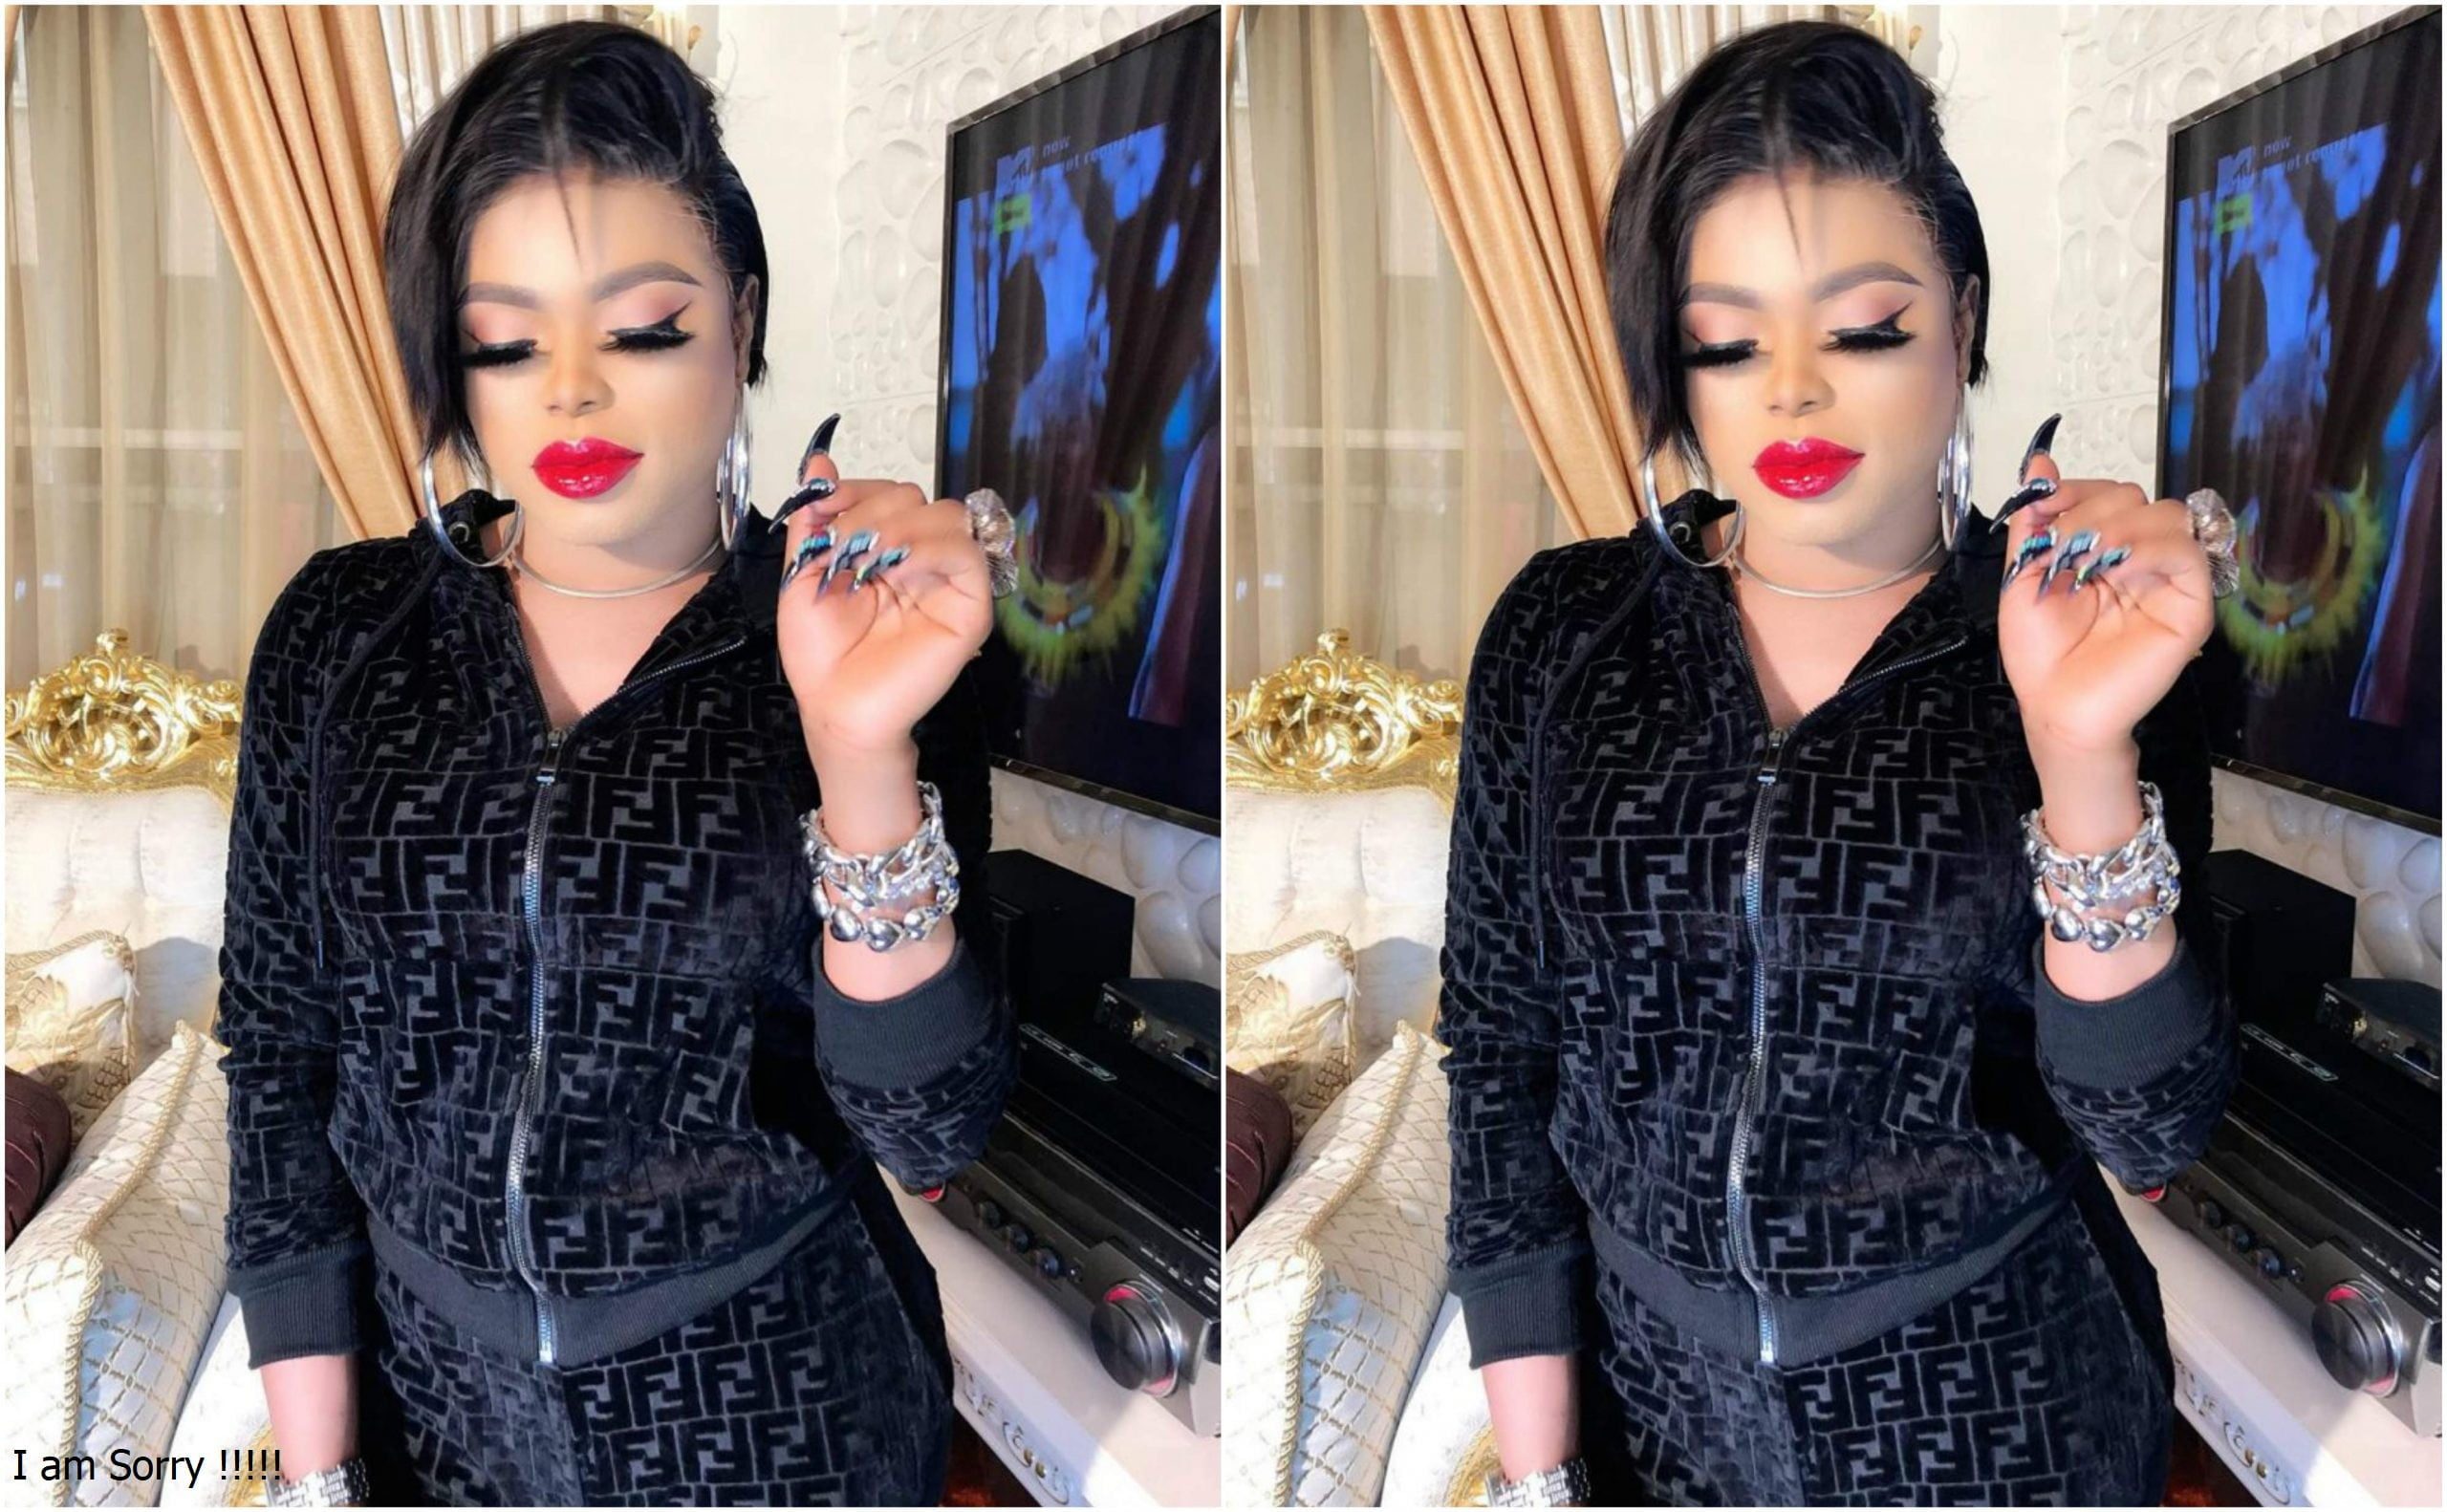 I Cannot Leave My Over 10 Rich Sugar Daddies To Marry- Bobrisky